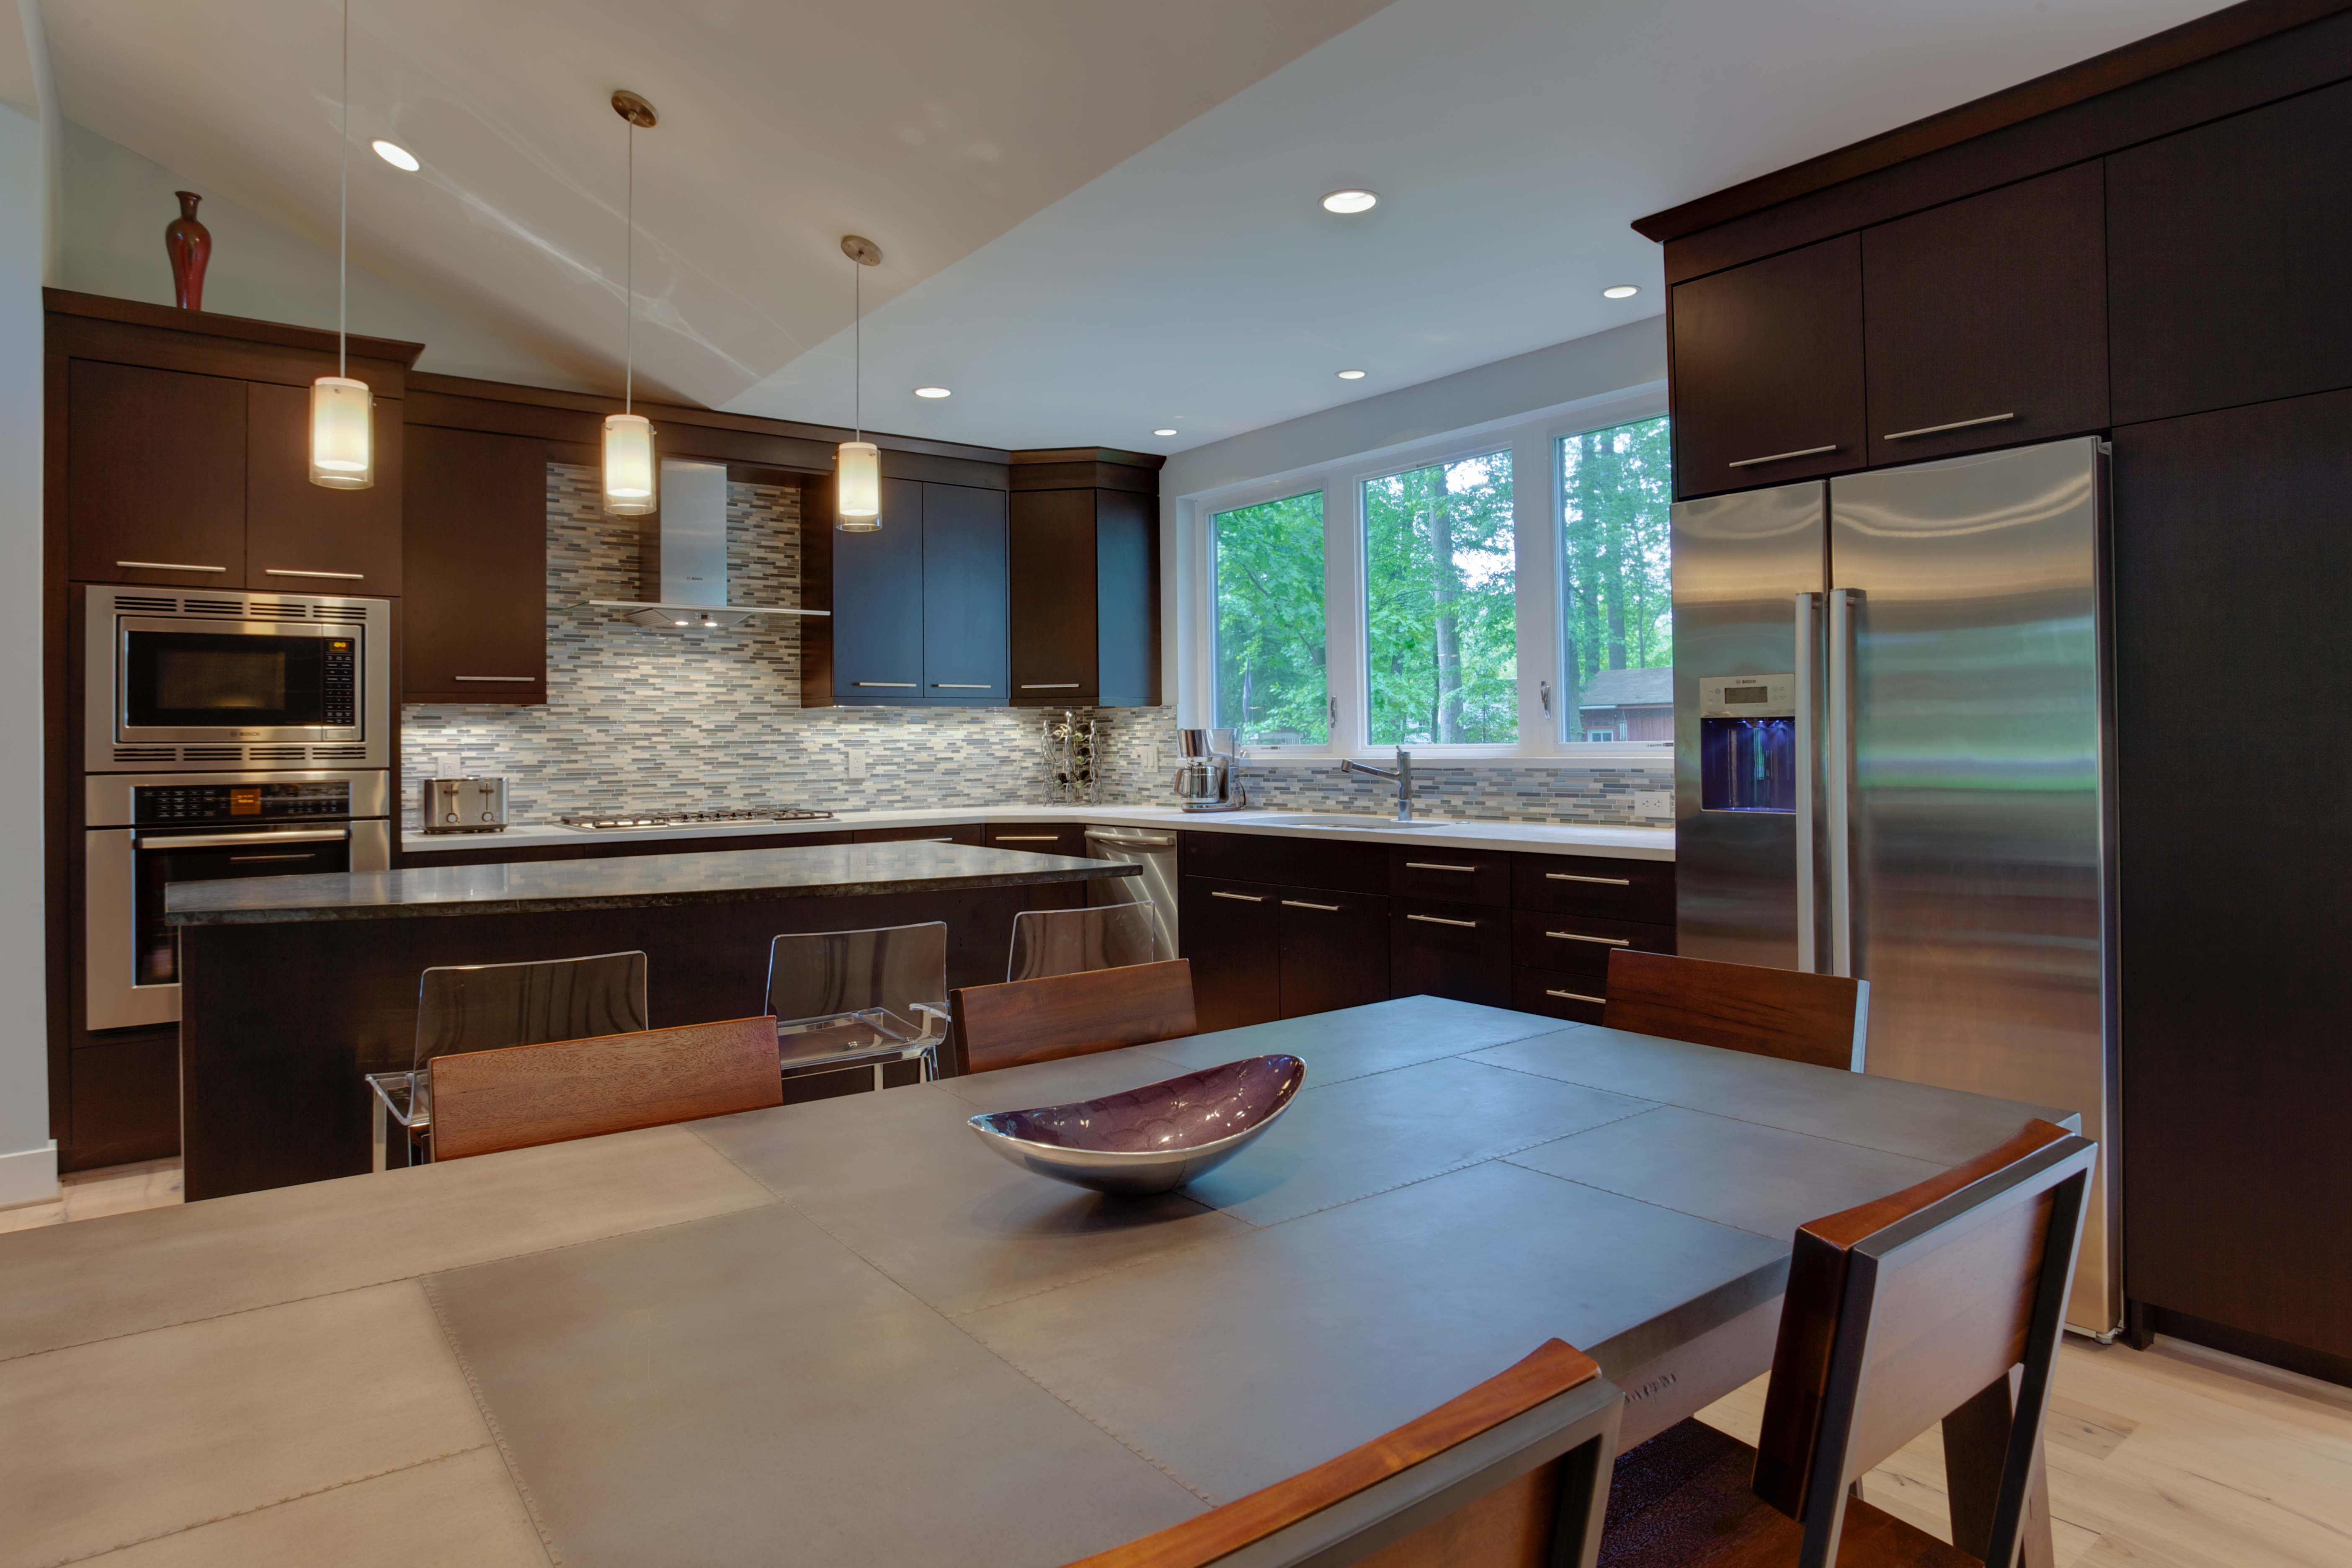 View of kitchen with brown kitchen cabinets and stainless appliances